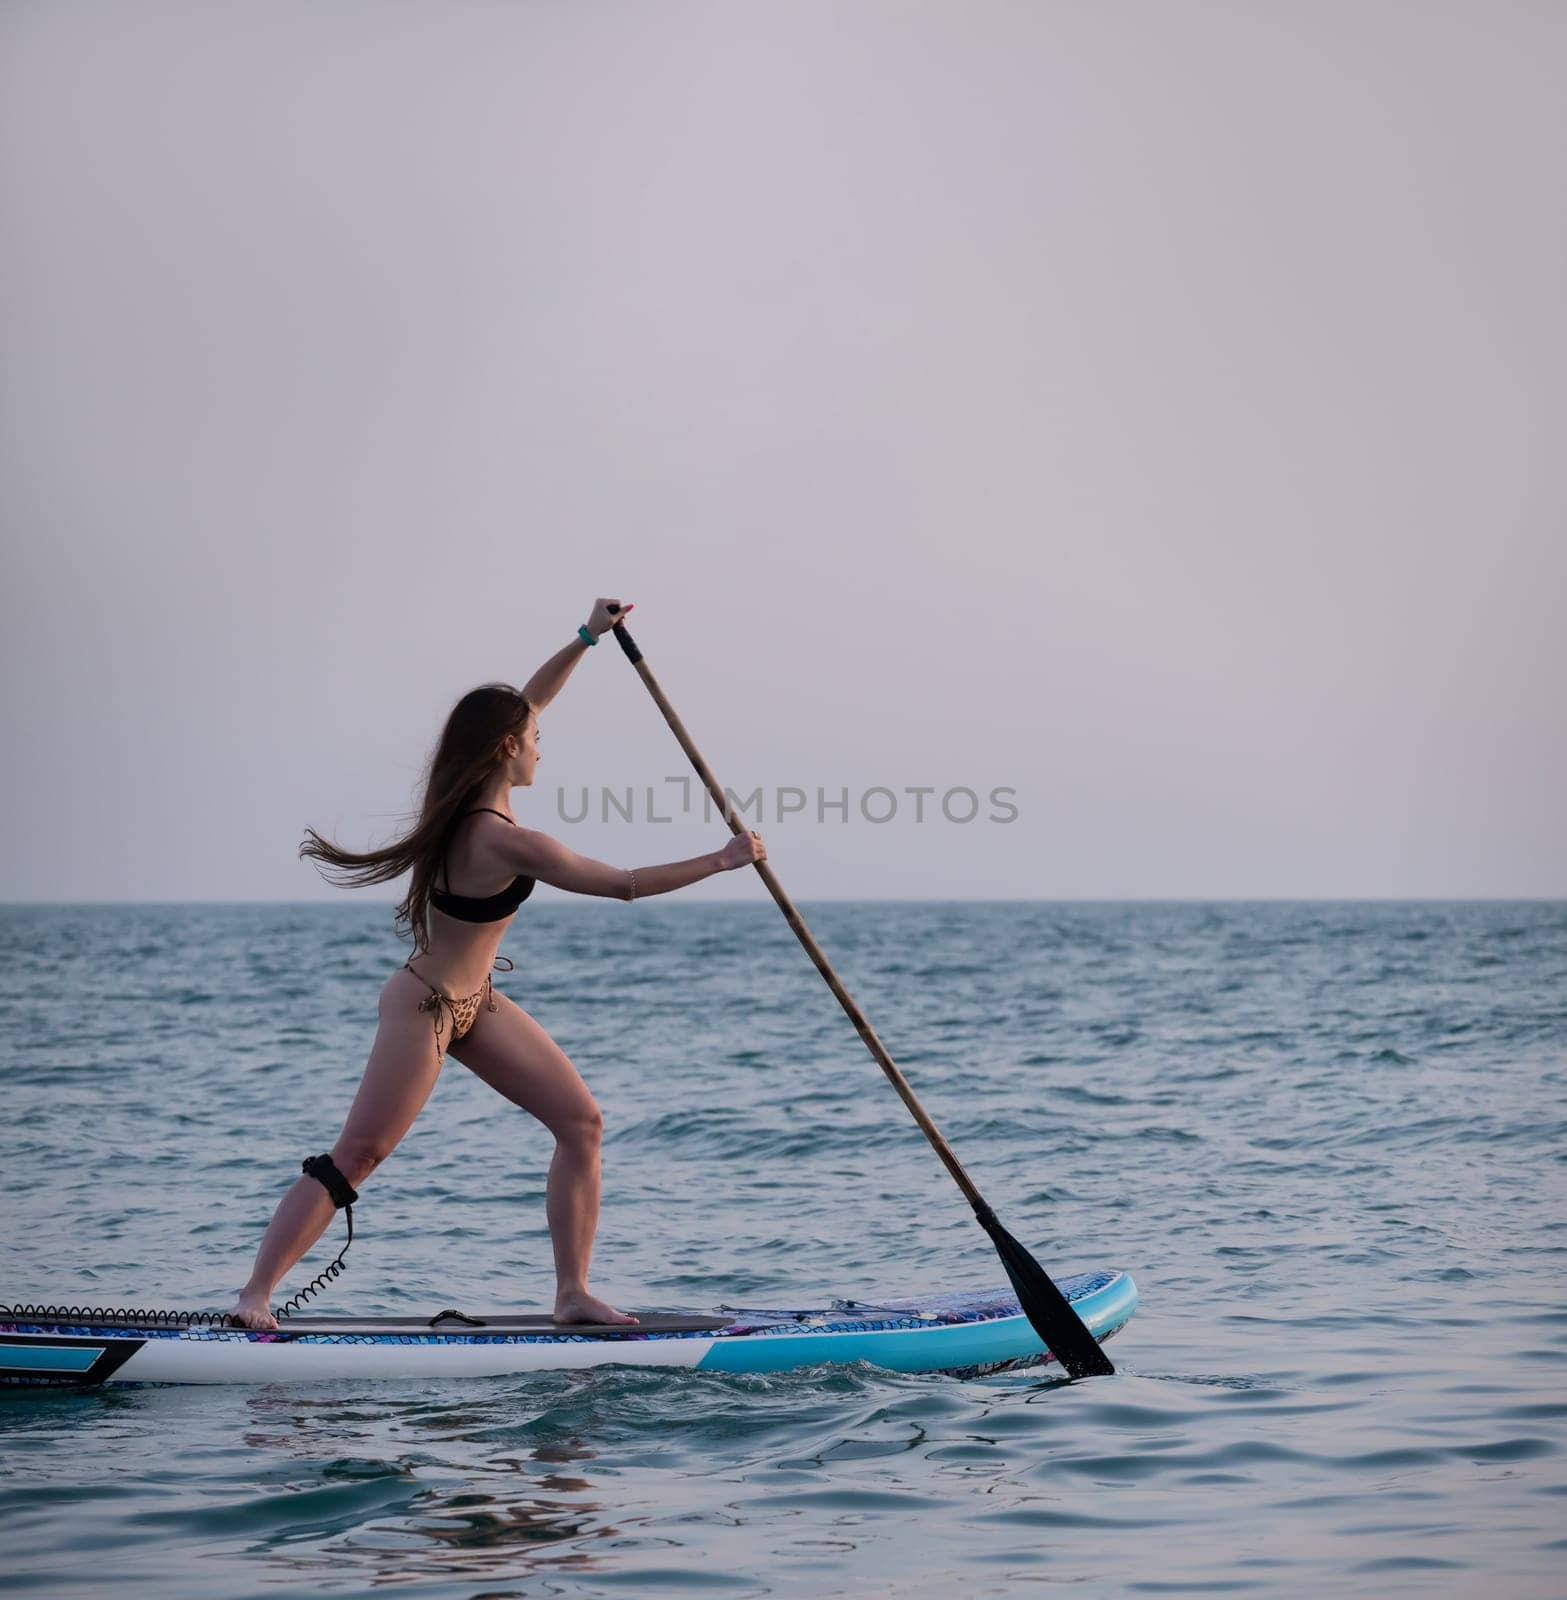 sexy girl on a sup board in the sea with a paddle professionally swims beautifully and gracefully by Rotozey